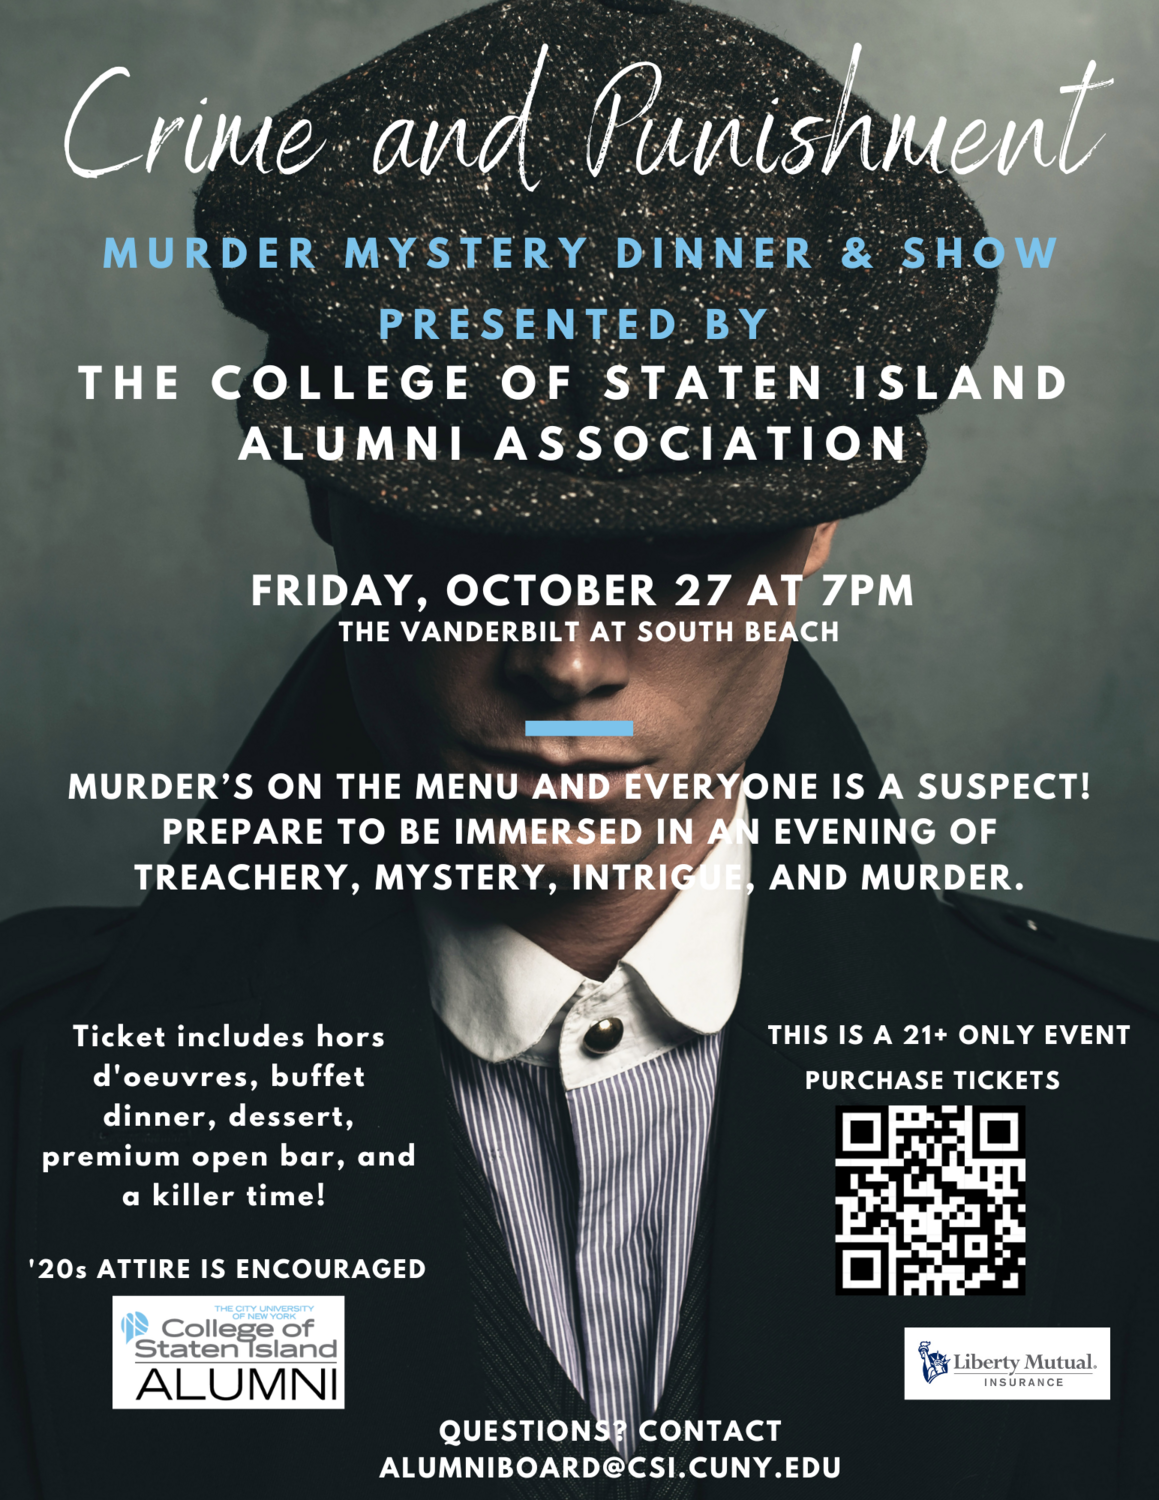 Murder Mystery Dinner and Show Hosted by the CSI Alumni Association